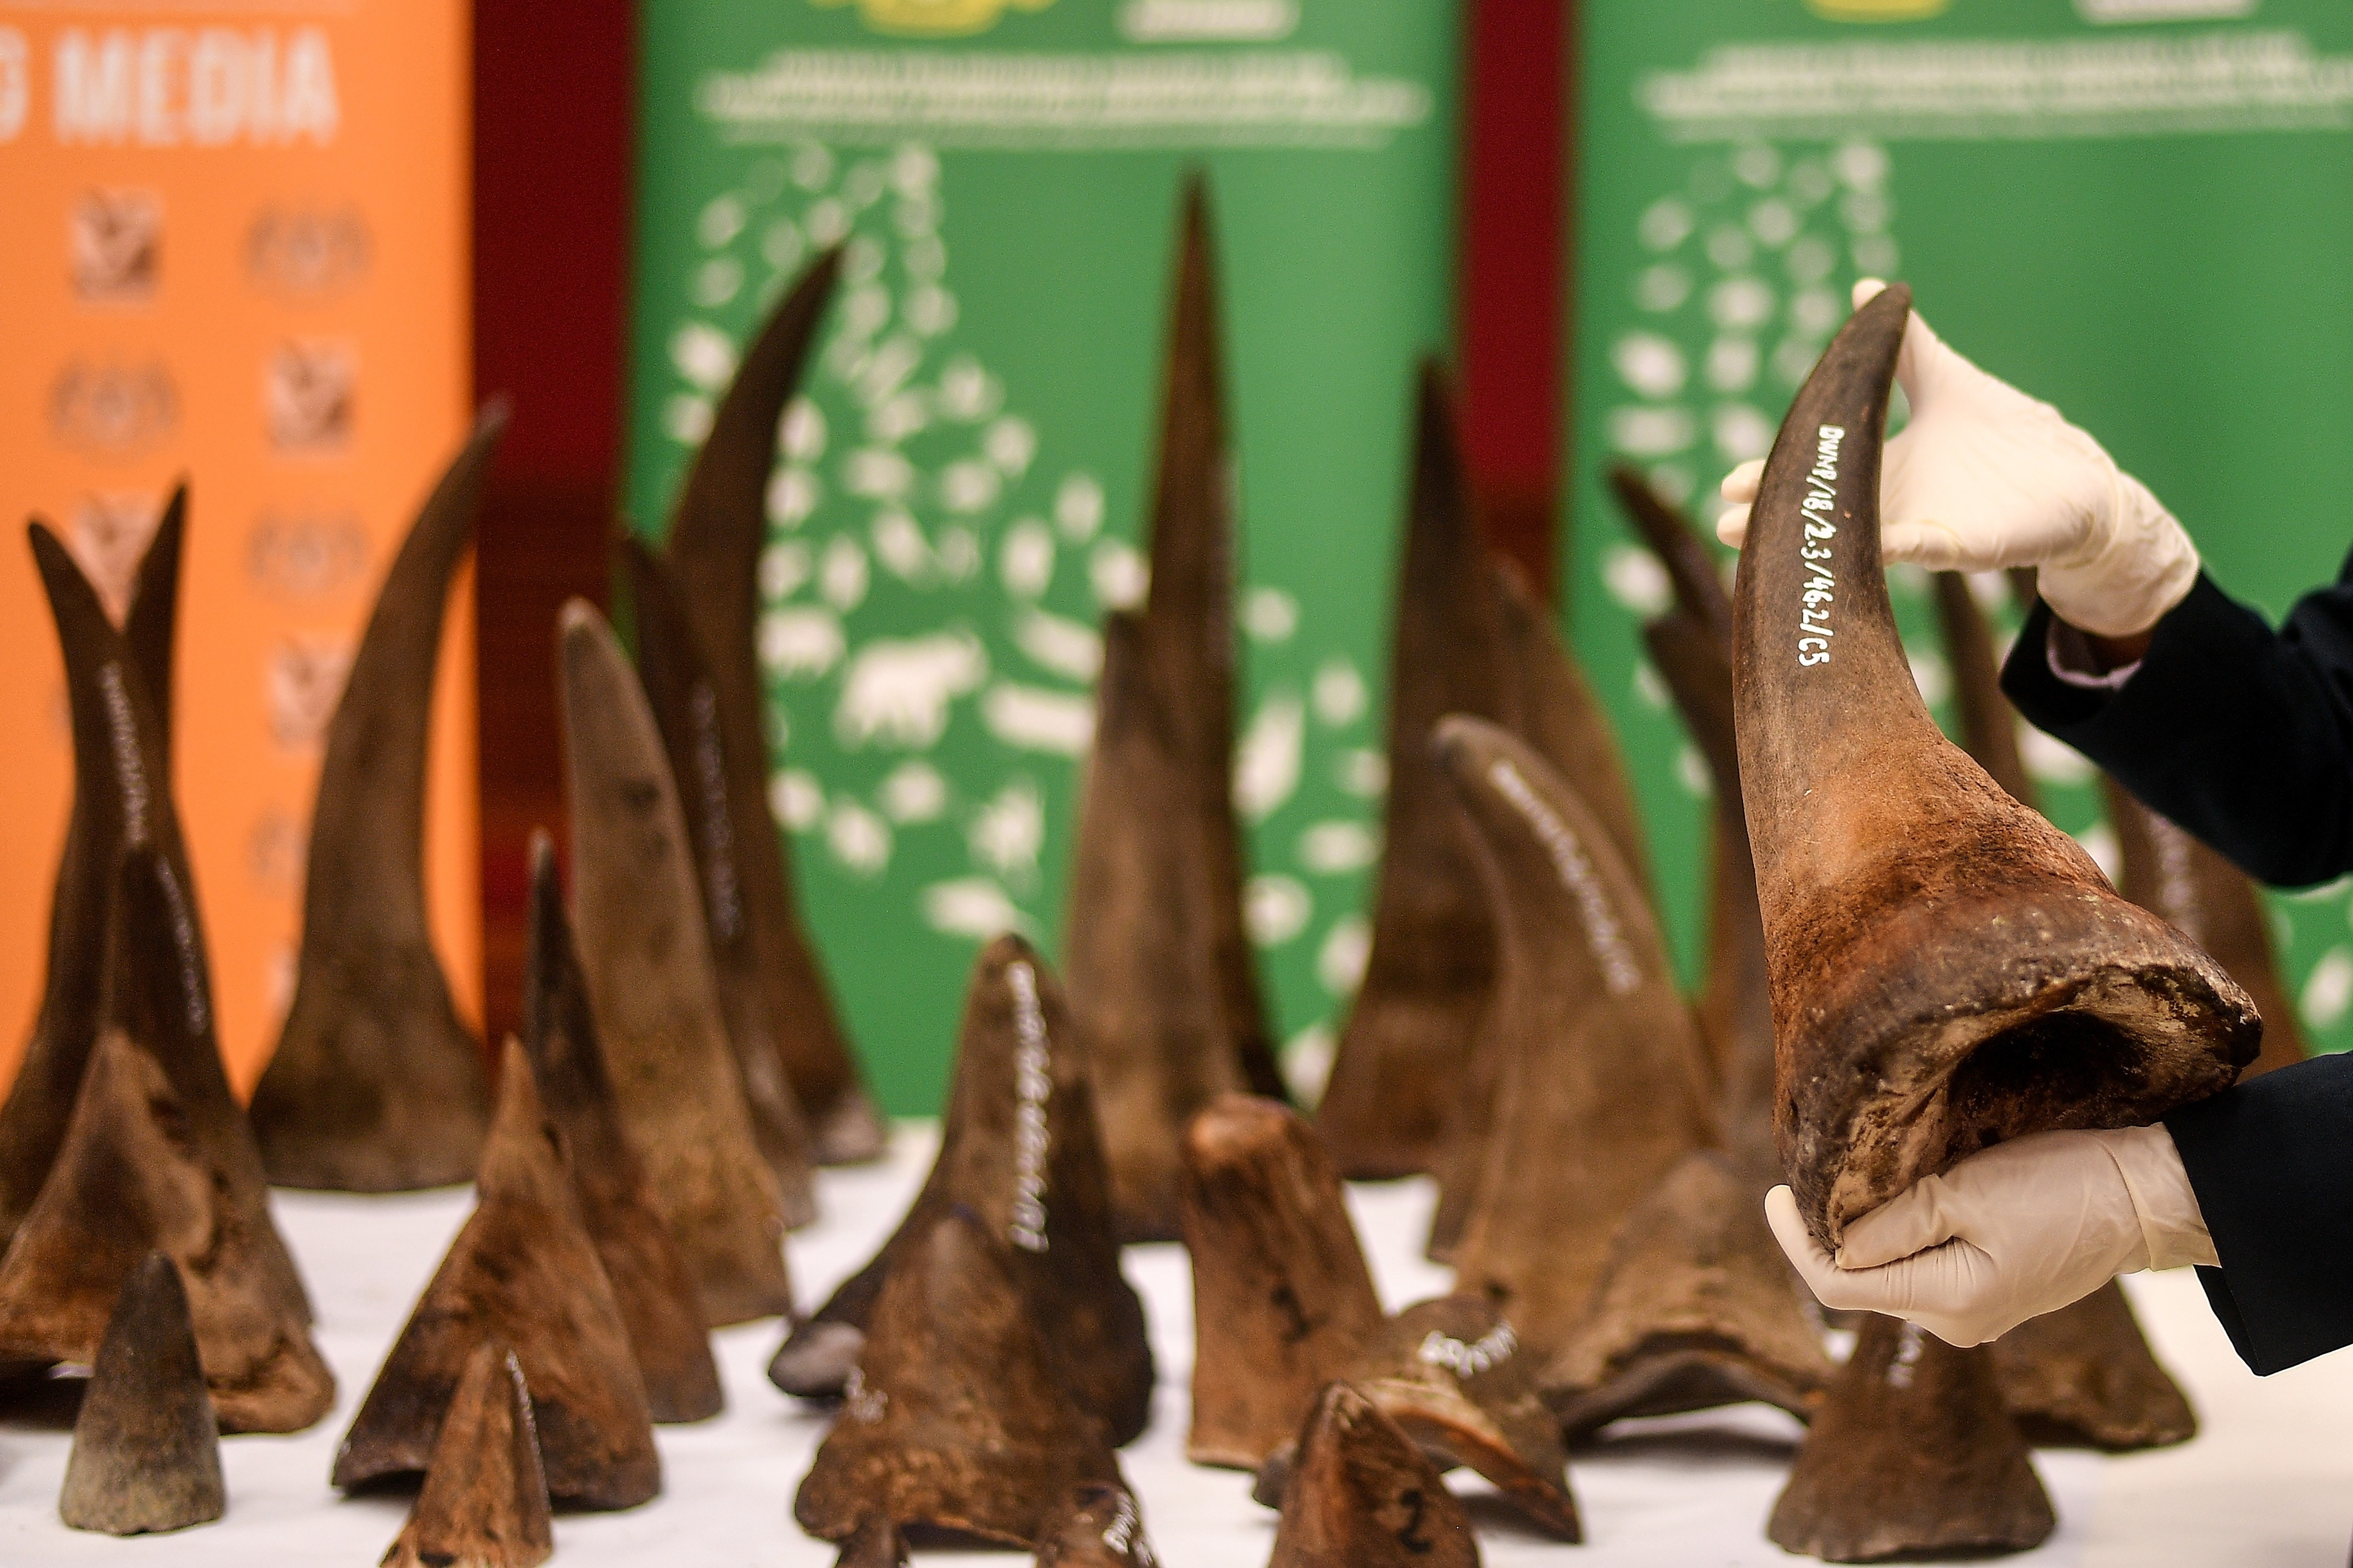 A Malaysian Wildlife official displays seized rhino horns and other animal parts at the Department of Wildlife and National Parks headquarters in Kuala Lumpur on Aug. 20, 2018. (Manan Vatsyayana—AFP/Getty Images)